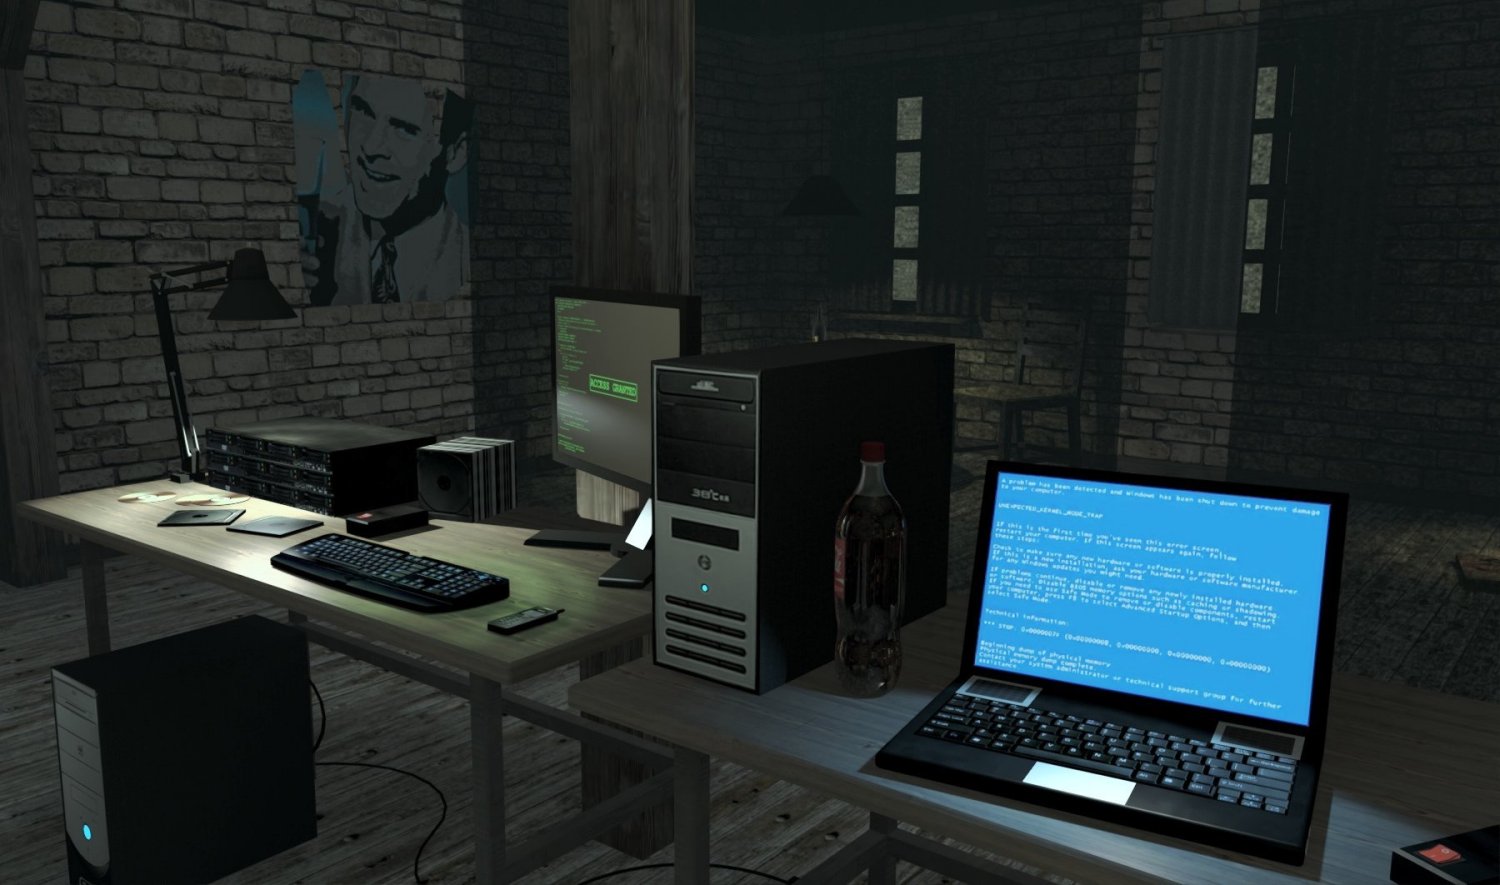 The hackers lair